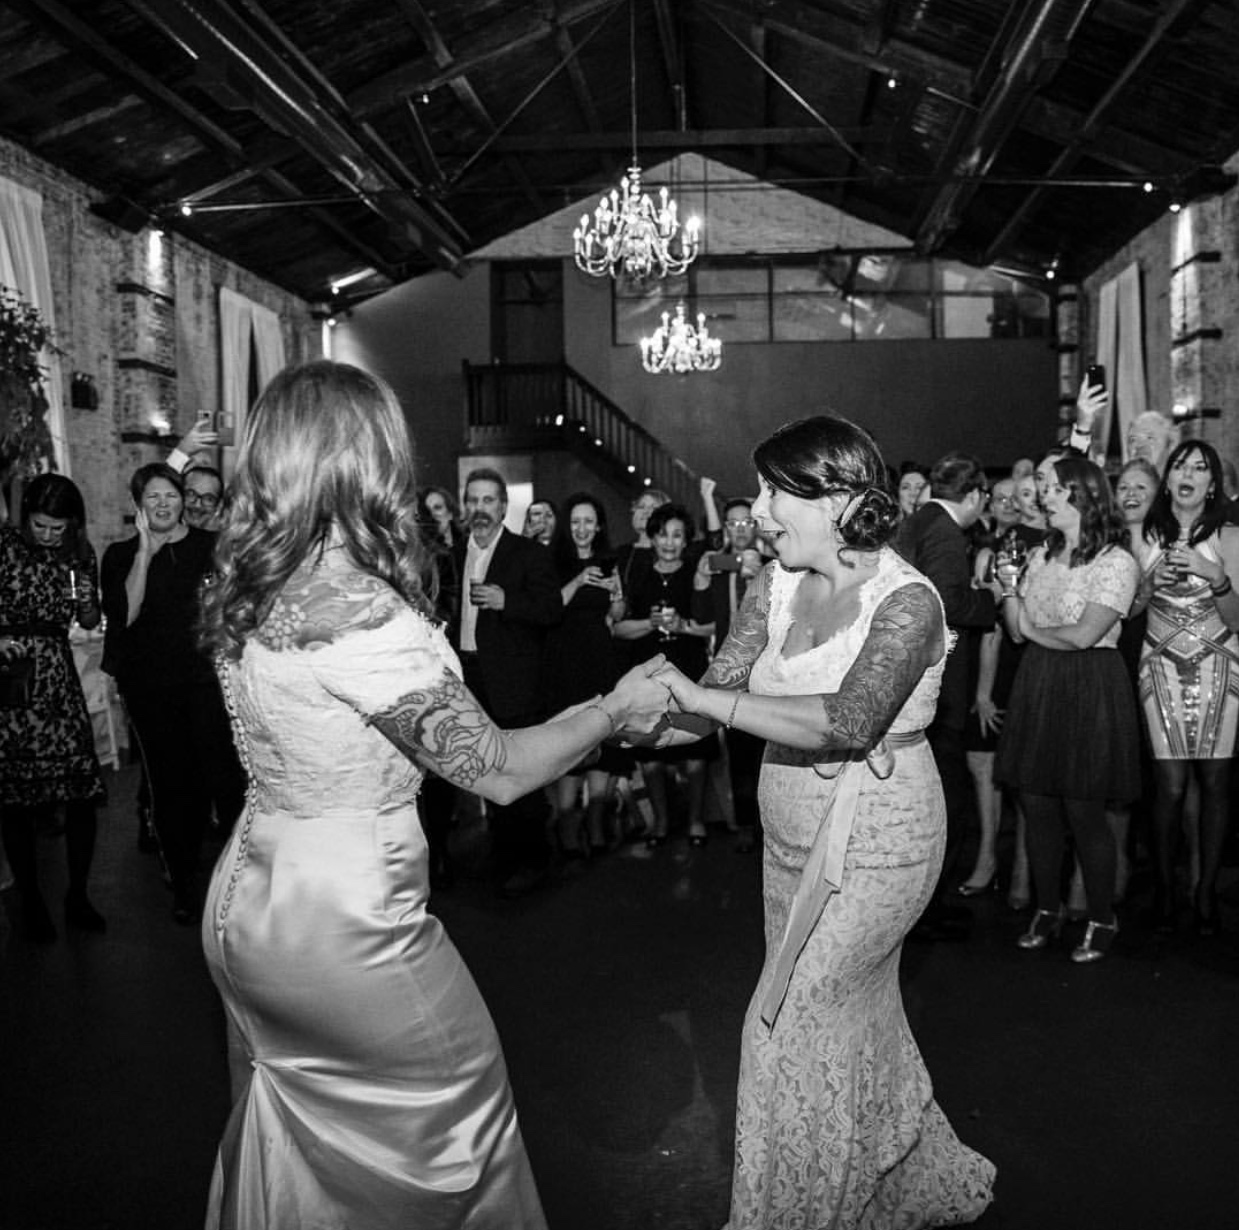 Dana and Allison's first dance. Wedding routine choreographed by Brooklyn Dance Lessons.